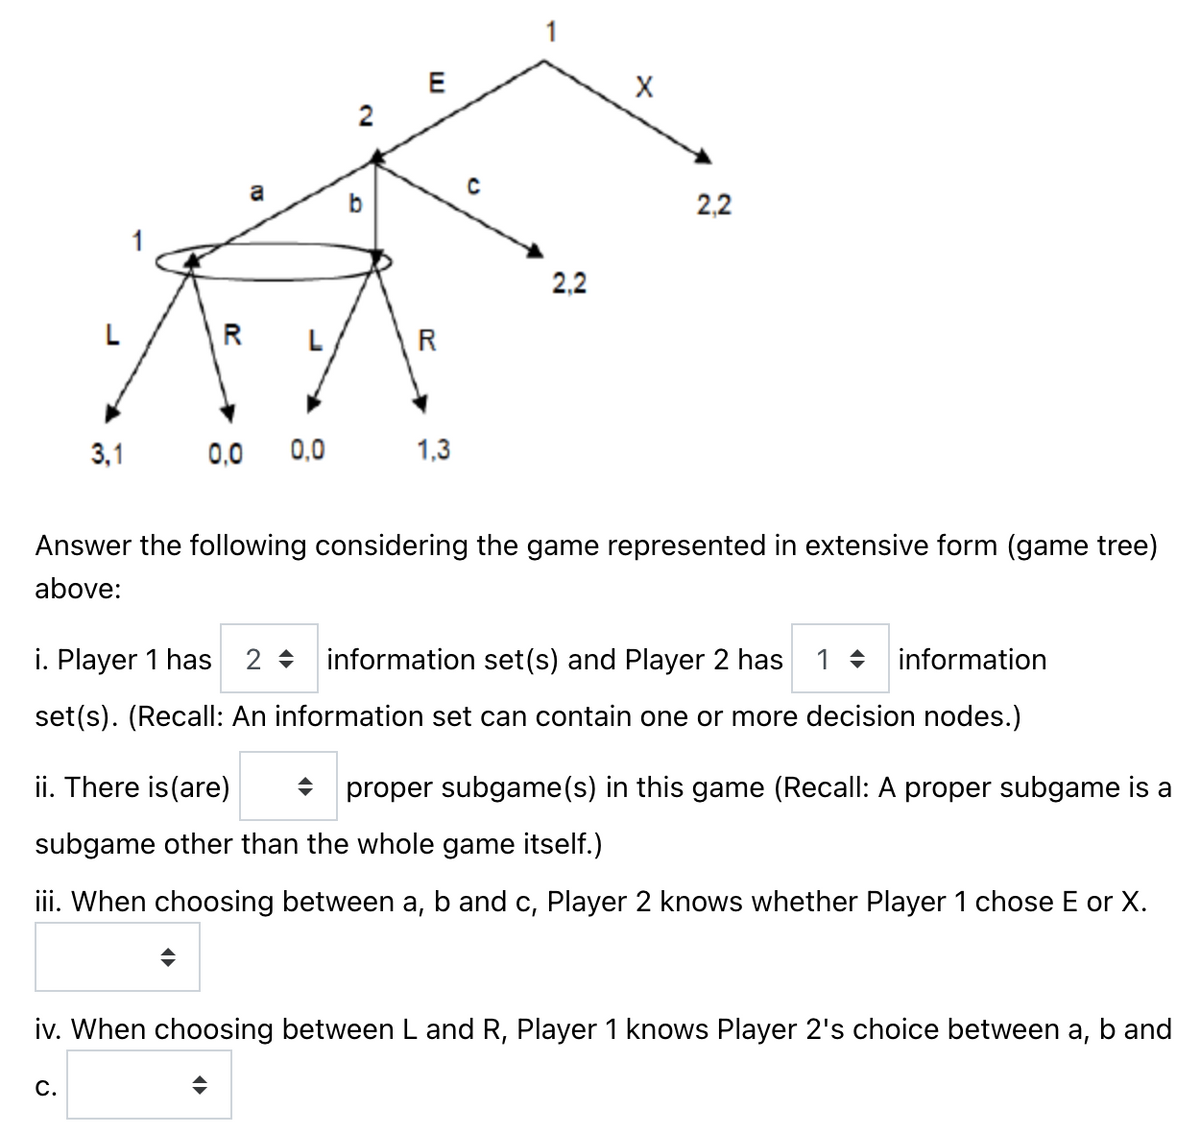 20
3,1 0,0
a
C.
0.0
◆
2
D
E
R
1,3
с
2,2
X
Answer the following considering the game represented in extensive form (game tree)
above:
2,2
i. Player 1 has 2
information set(s) and Player 2 has 1 information
set(s). (Recall: An information set can contain one or more decision nodes.)
ii. There is (are) ◆ proper subgame(s) in this game (Recall: A proper subgame is a
subgame other than the whole game itself.)
iii. When choosing between a, b and c, Player 2 knows whether Player 1 chose E or X.
iv. When choosing between L and R, Player 1 knows Player 2's choice between a, b and